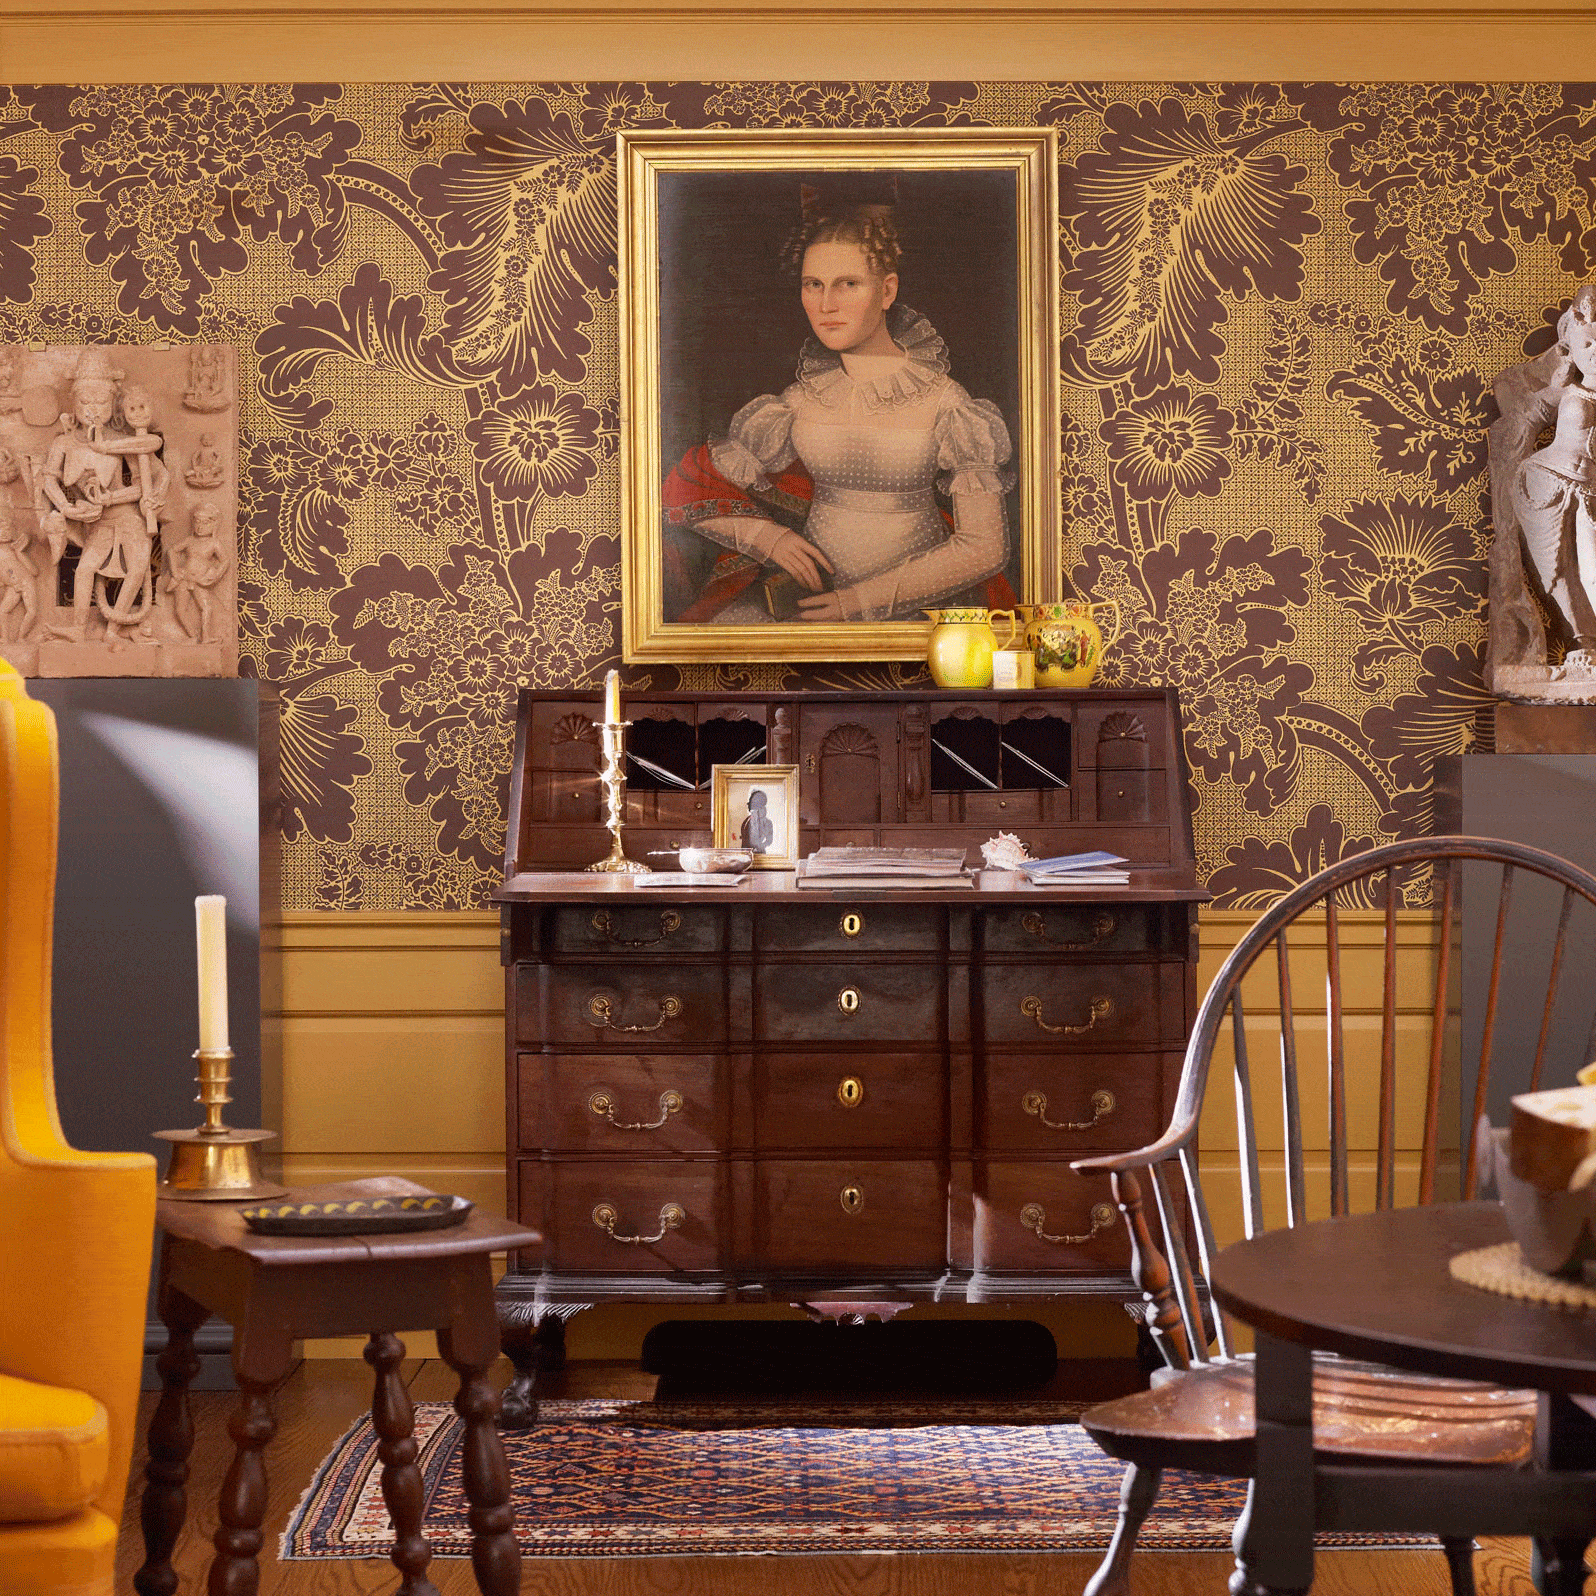 Wallpaper in an eighteenth-century English pattern serves as a background for South Asian sculpture and American antiques.